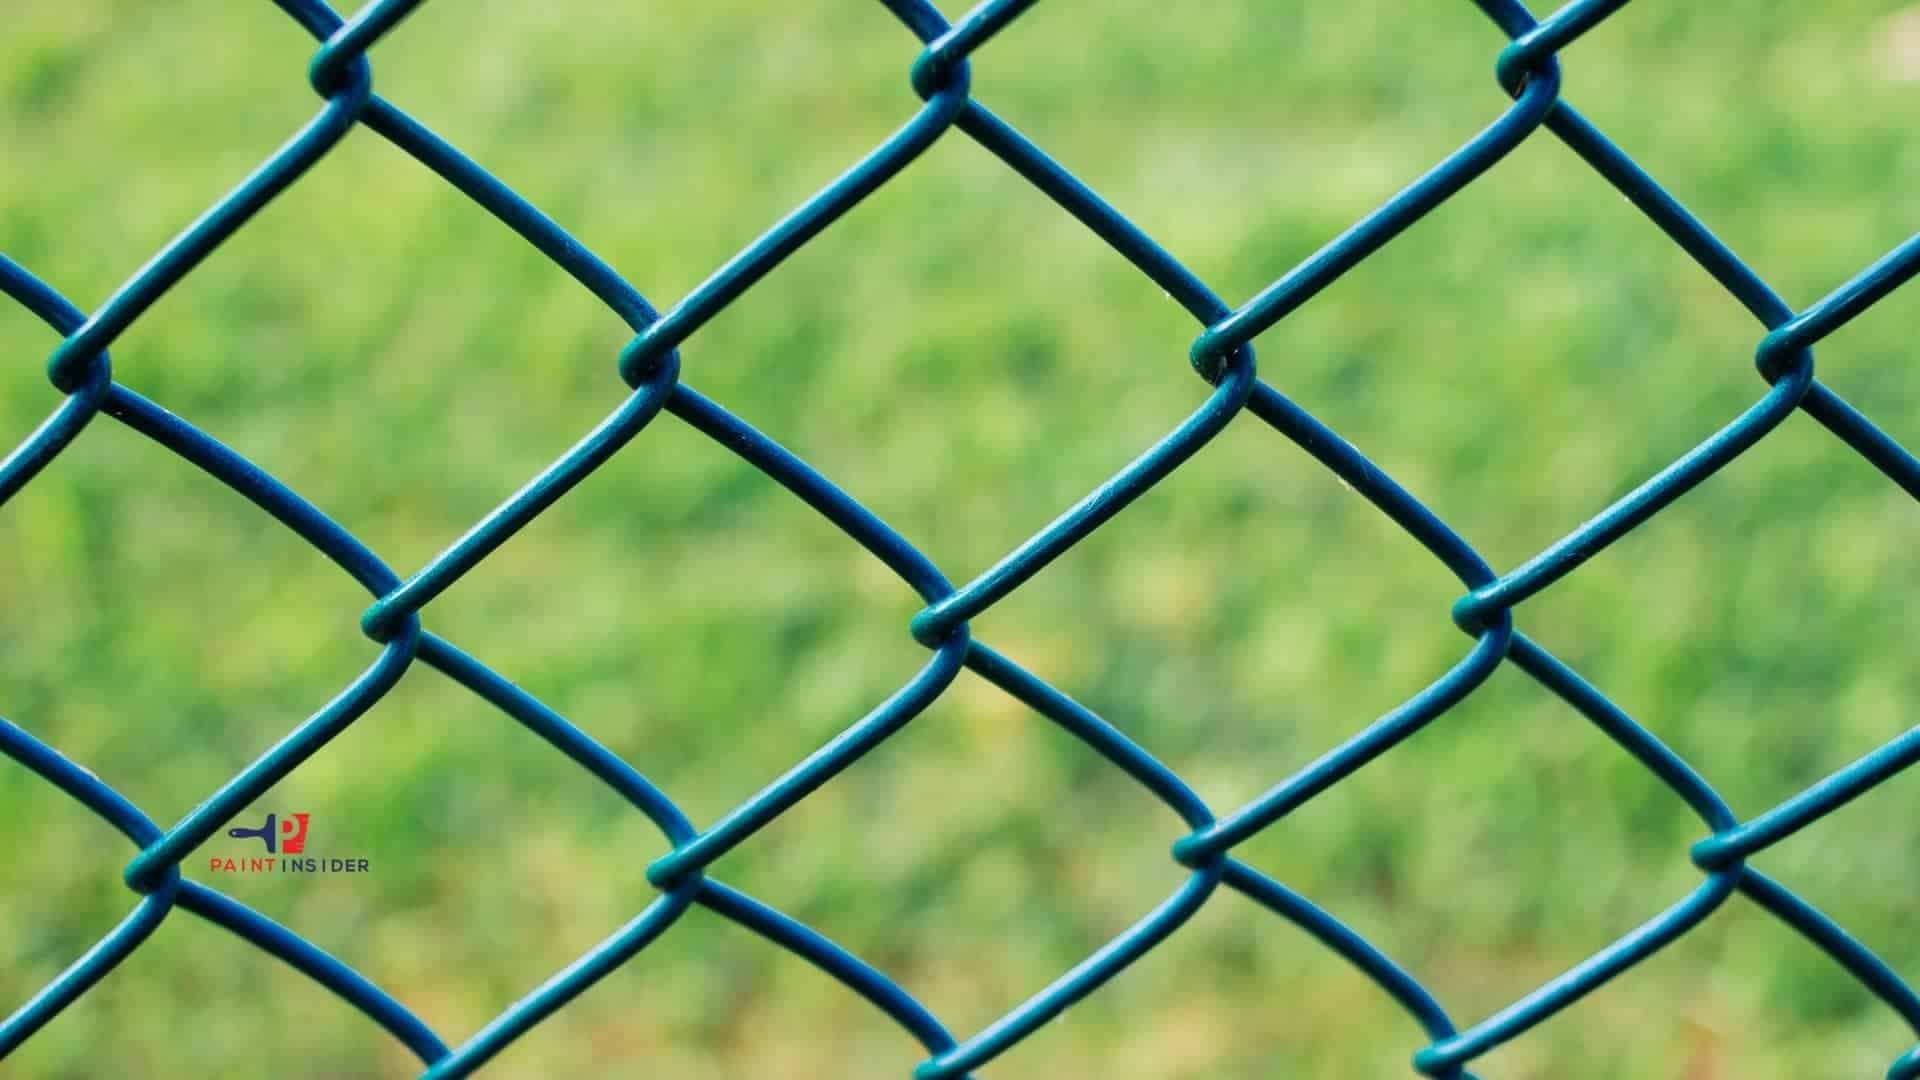 How To Paint A Chain Link Fence